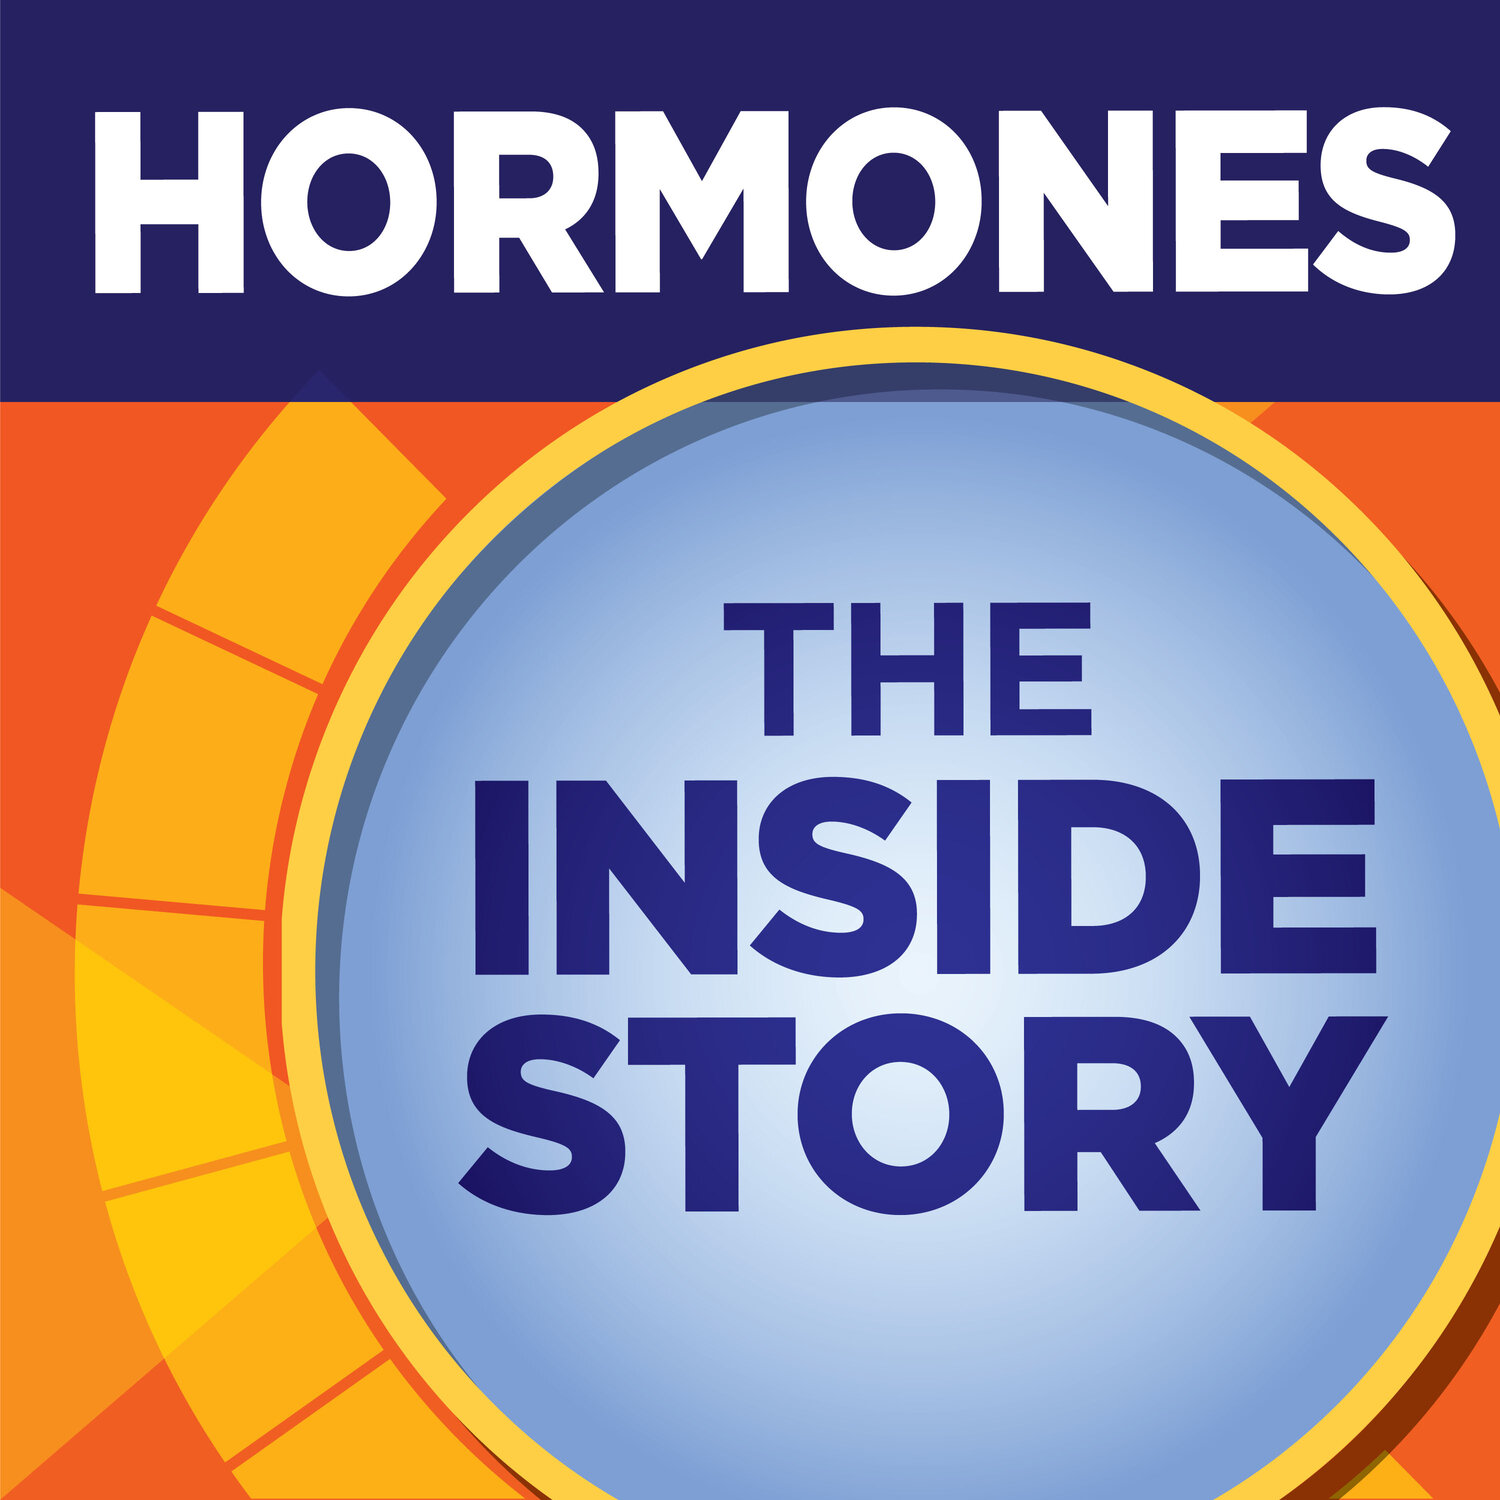 Are my hormones making me fat? Hormones: The Inside Story